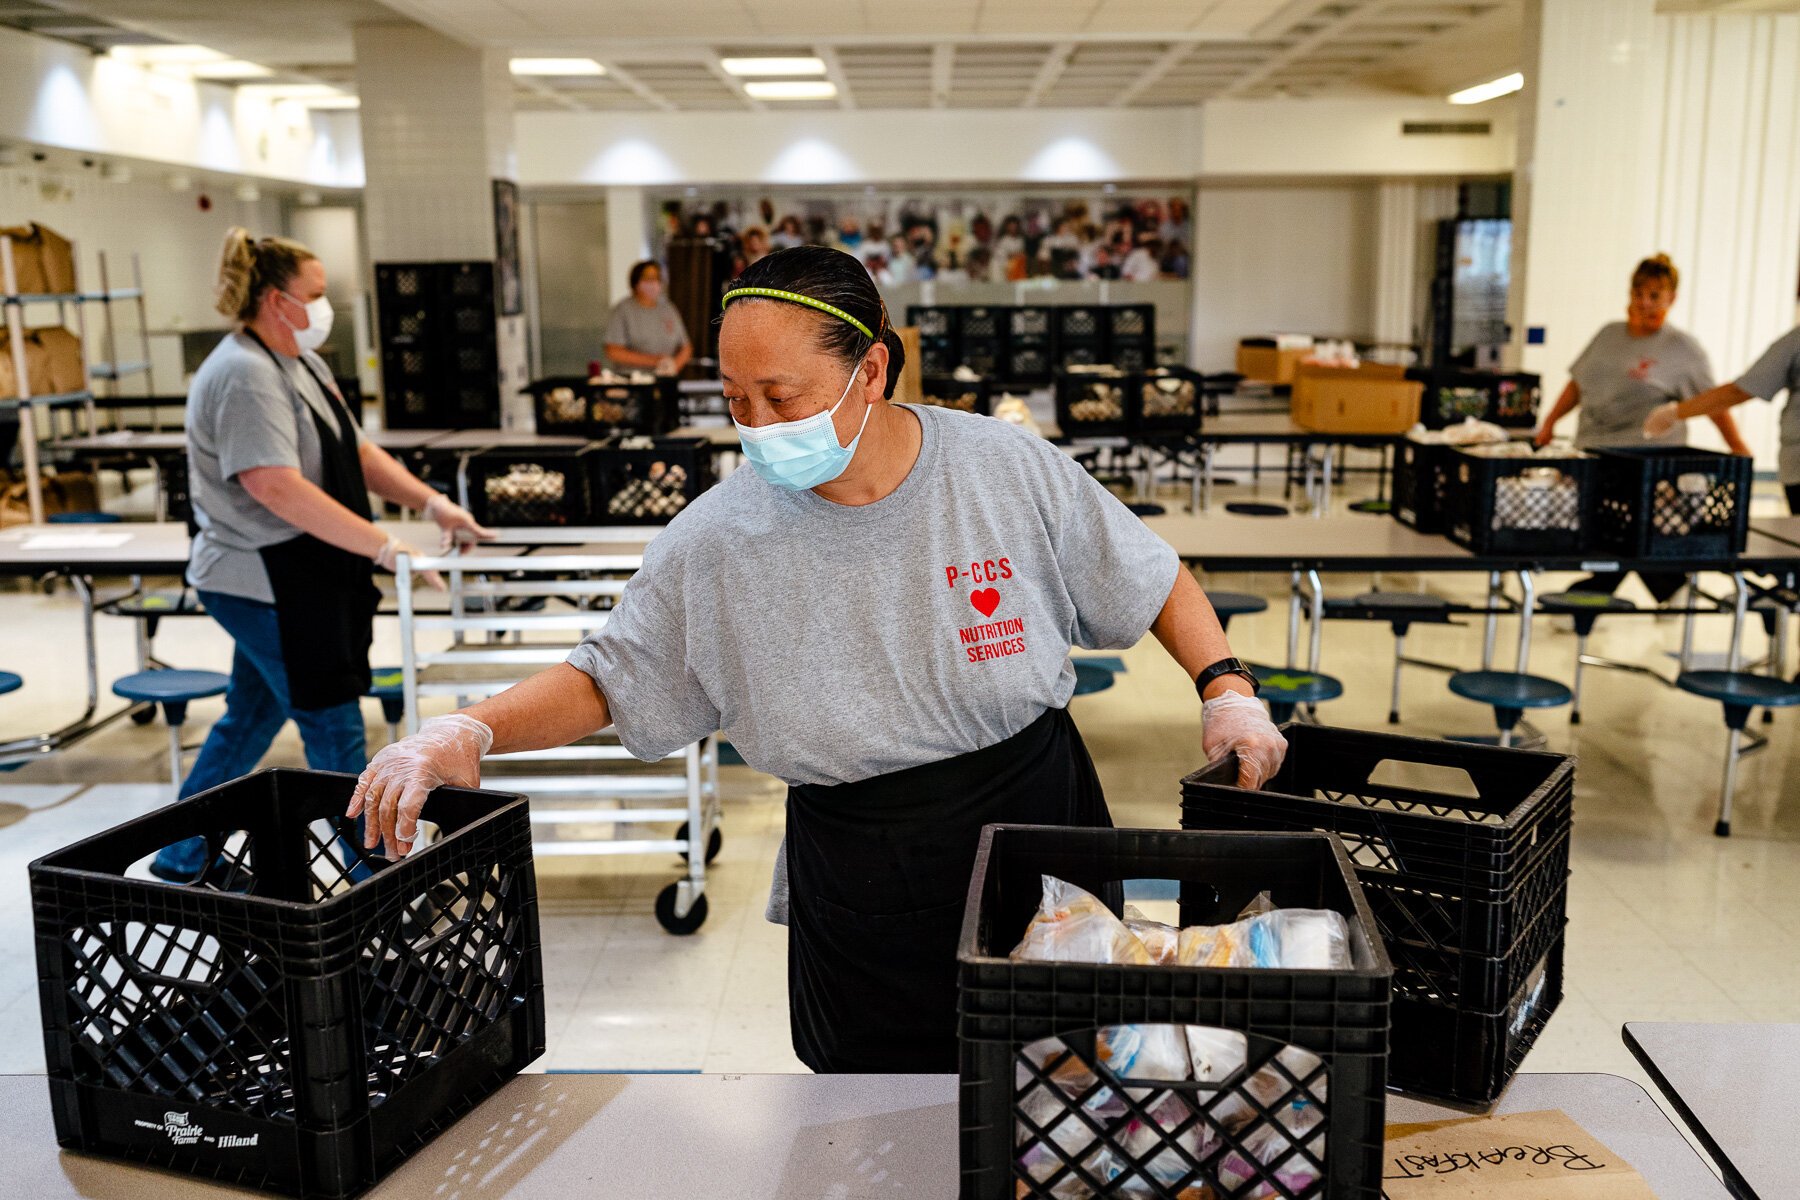 Plymouth-Canton Community Schools staffers prepare meals for pickup.